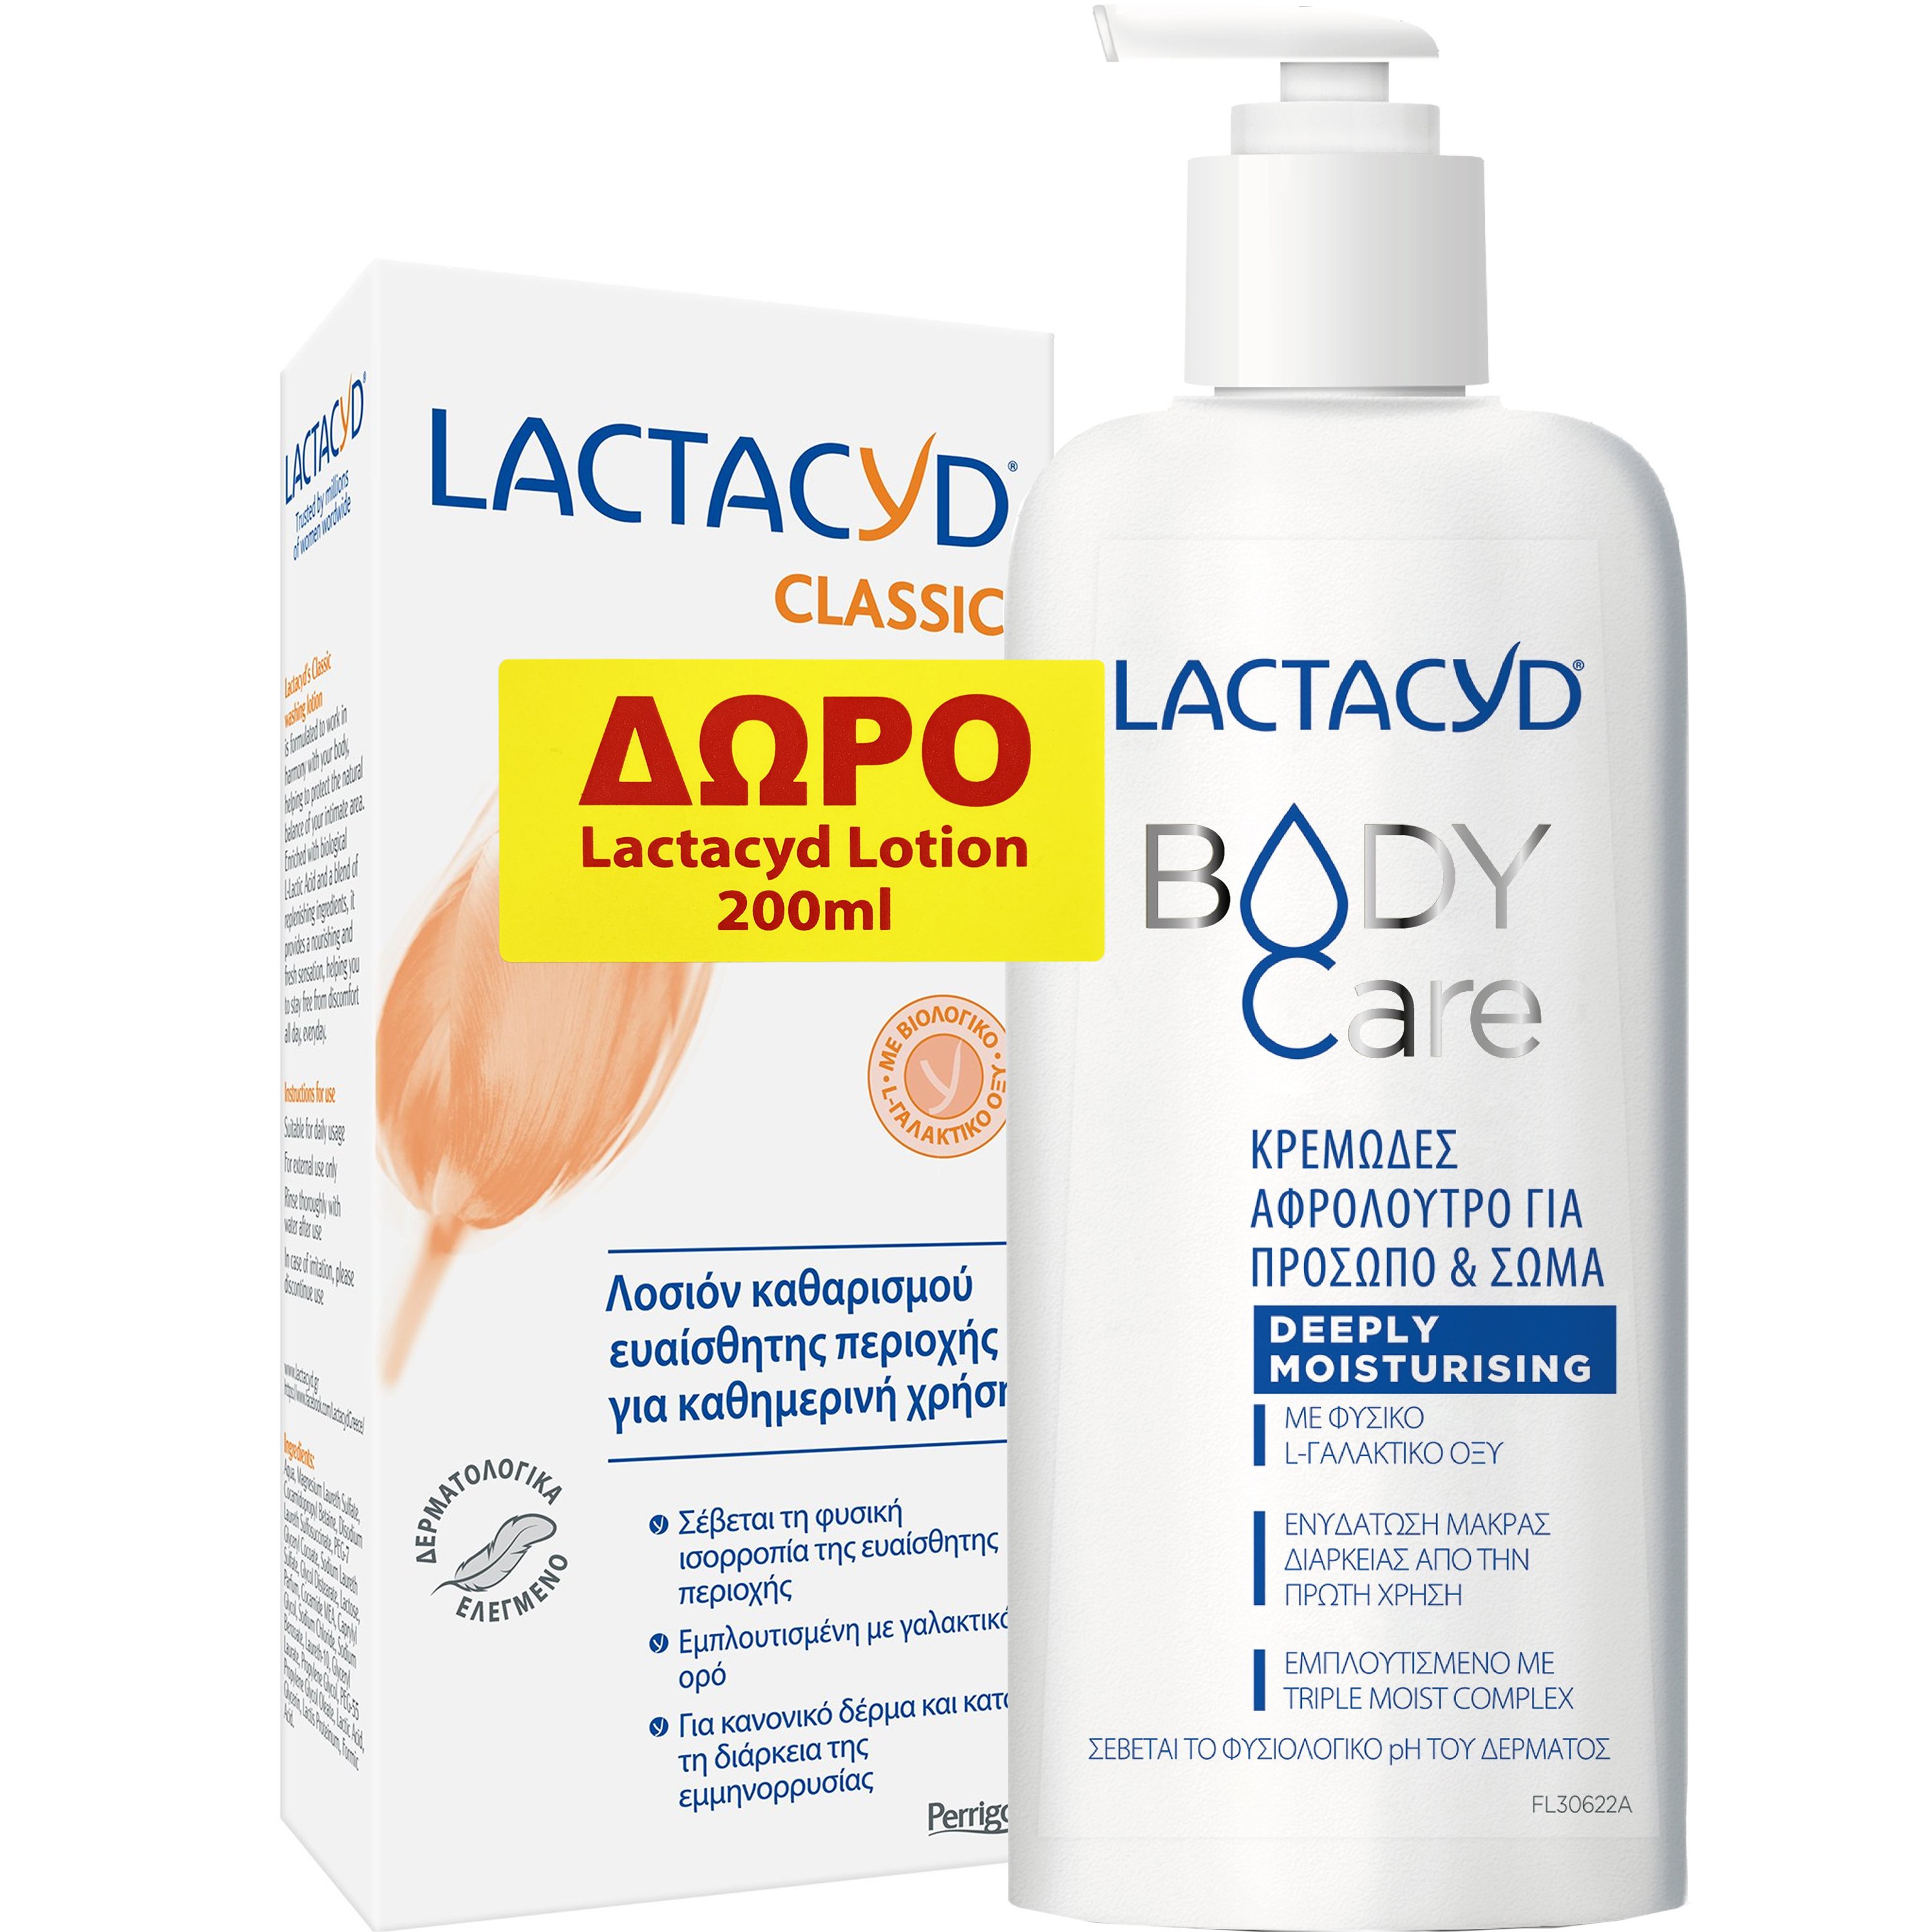 Lactacyd Promo Body Care Shower Gel & Δώρο Classic Intimate Washing Lotion 200ml